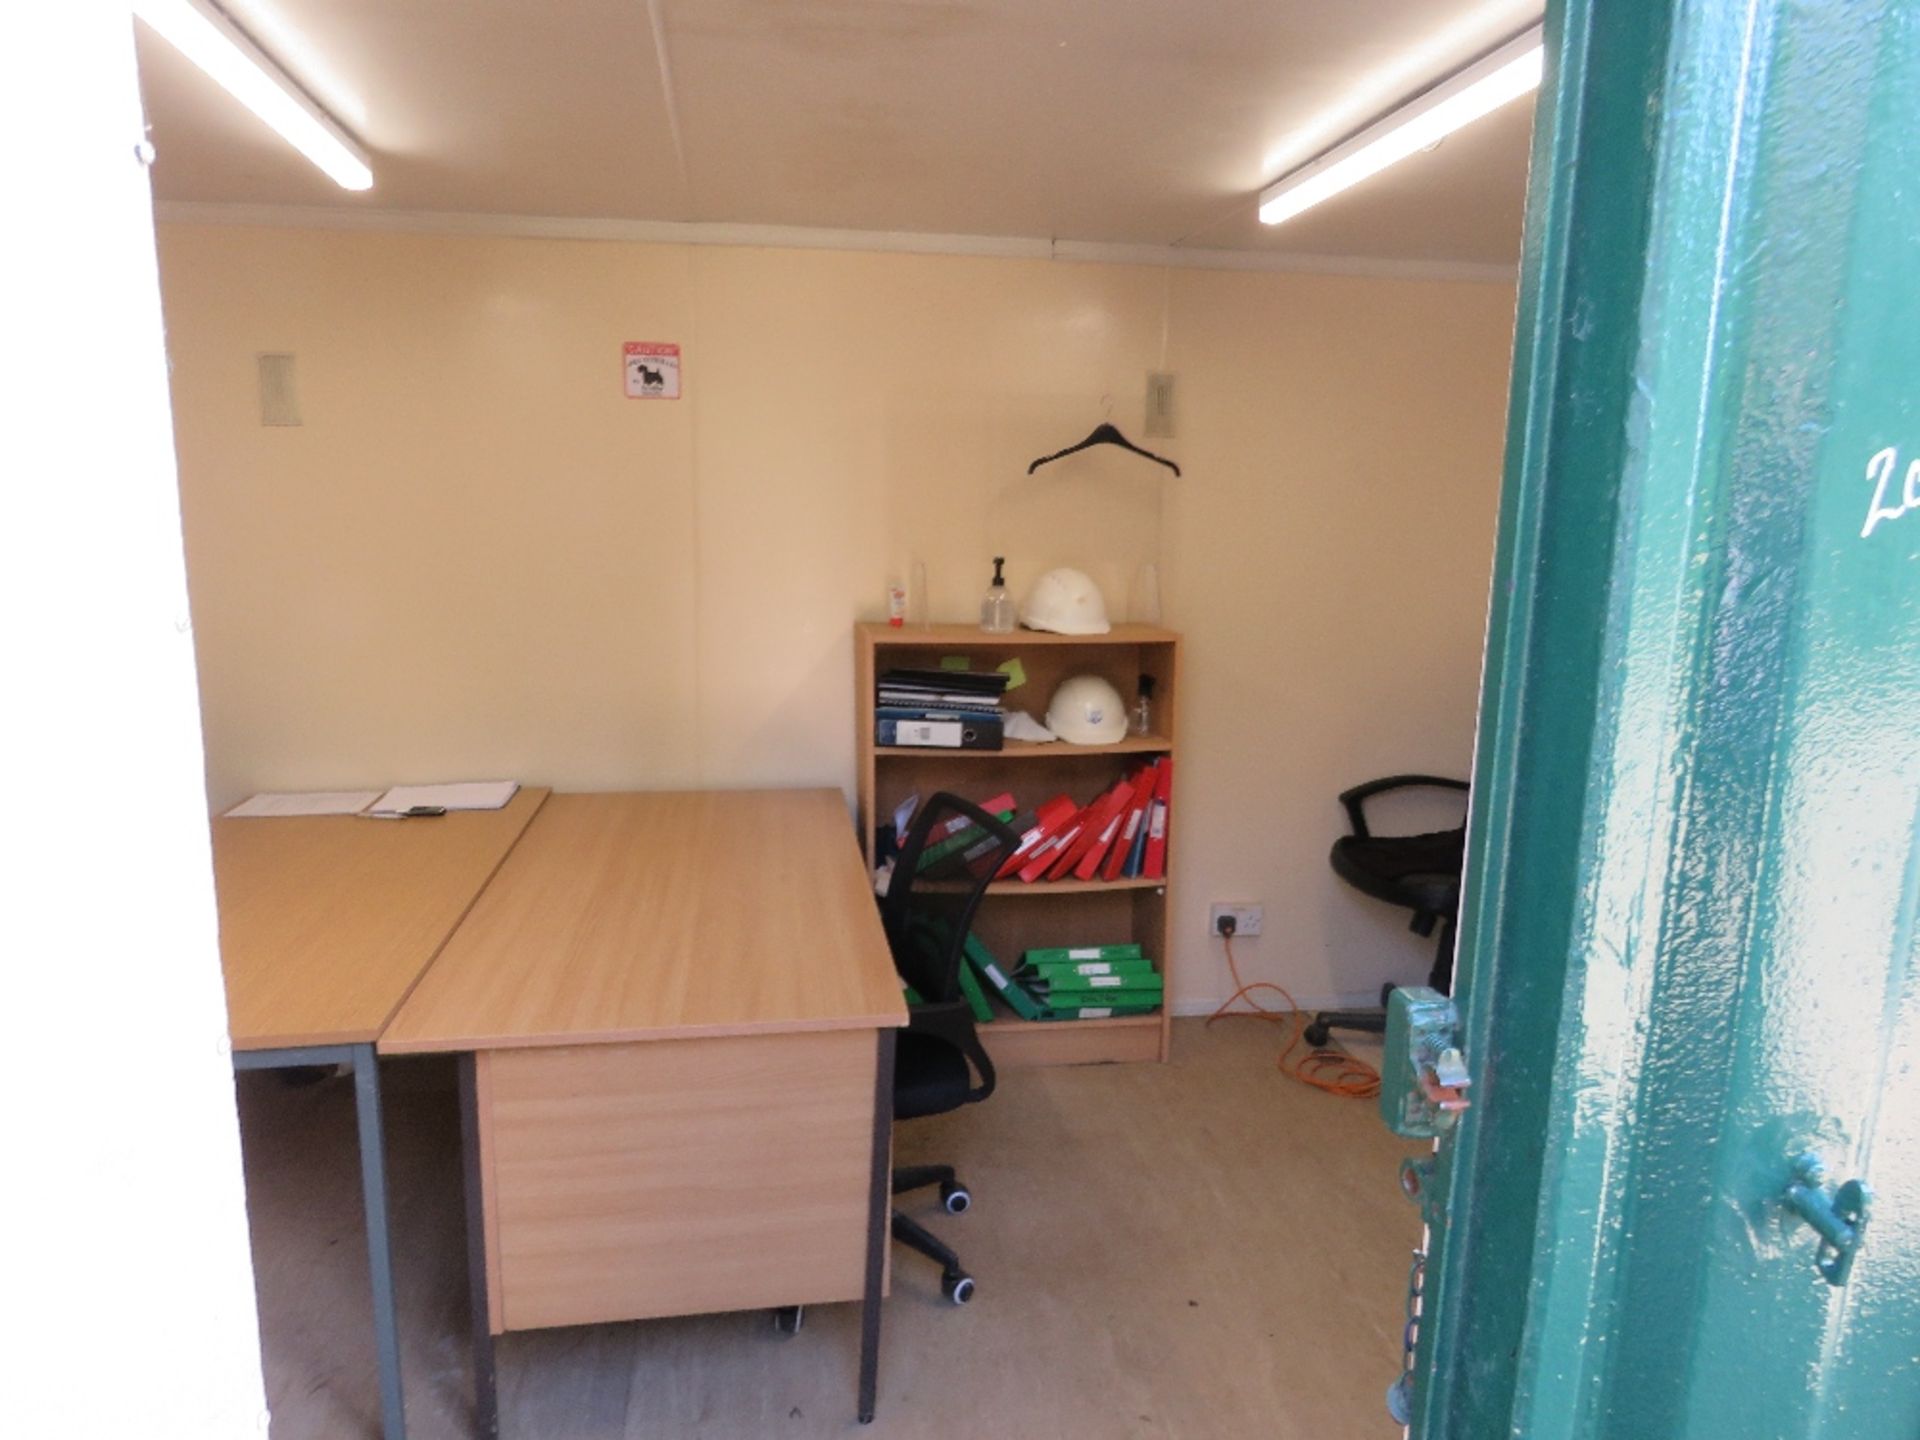 PORTABLE SITE OFFICE 16FT X 9FT APPROX OPEN PLAN AS SHOWN.. INCLUDES SOME FURNITURE. BEING SOLD ON B - Image 2 of 7